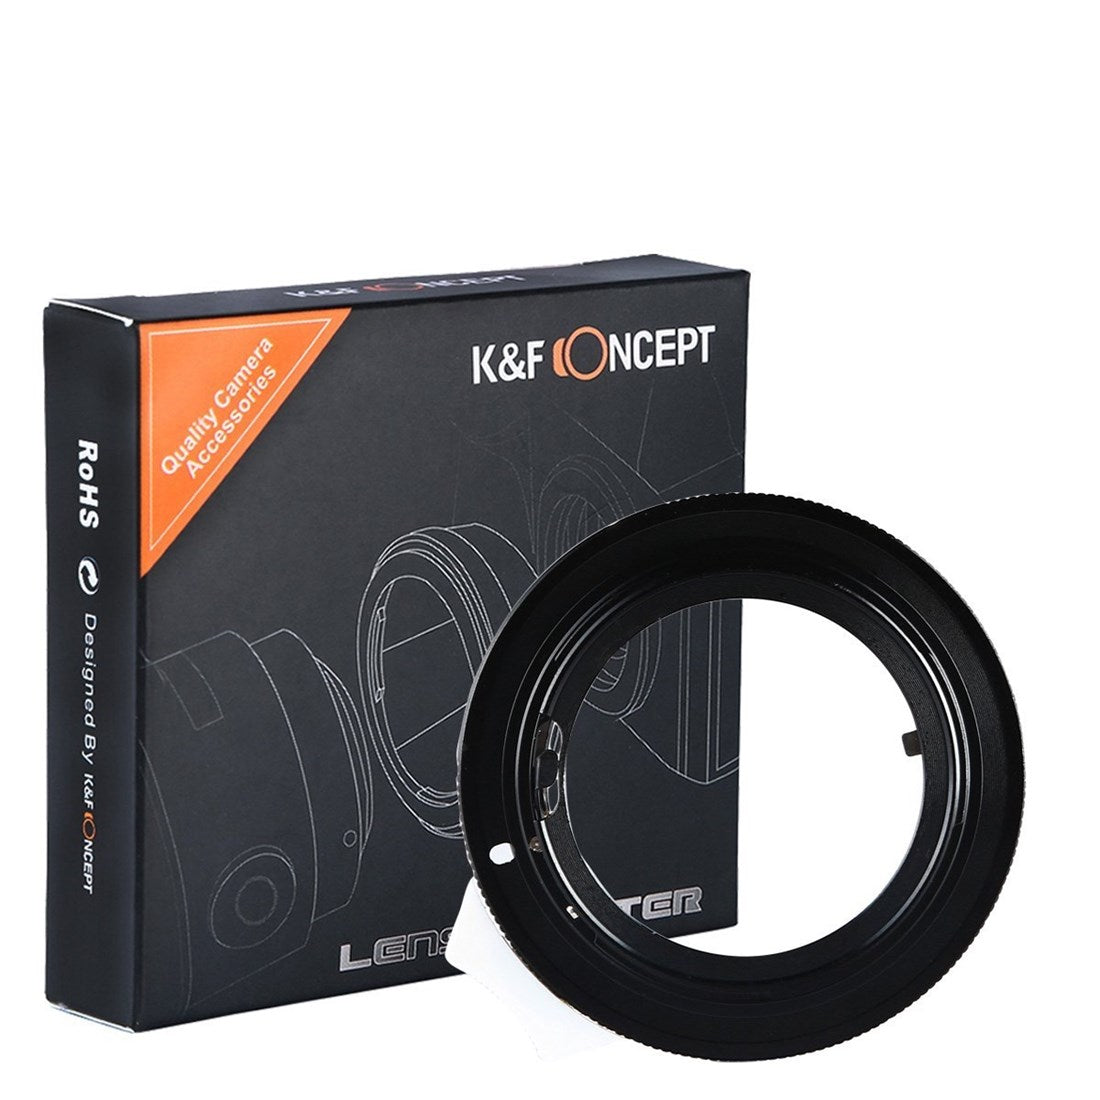 Product Image of K&F Concept Nikon G Lenses to Canon EF Lens Mount Adapter K&F Concept Lens Adapter KF06.131